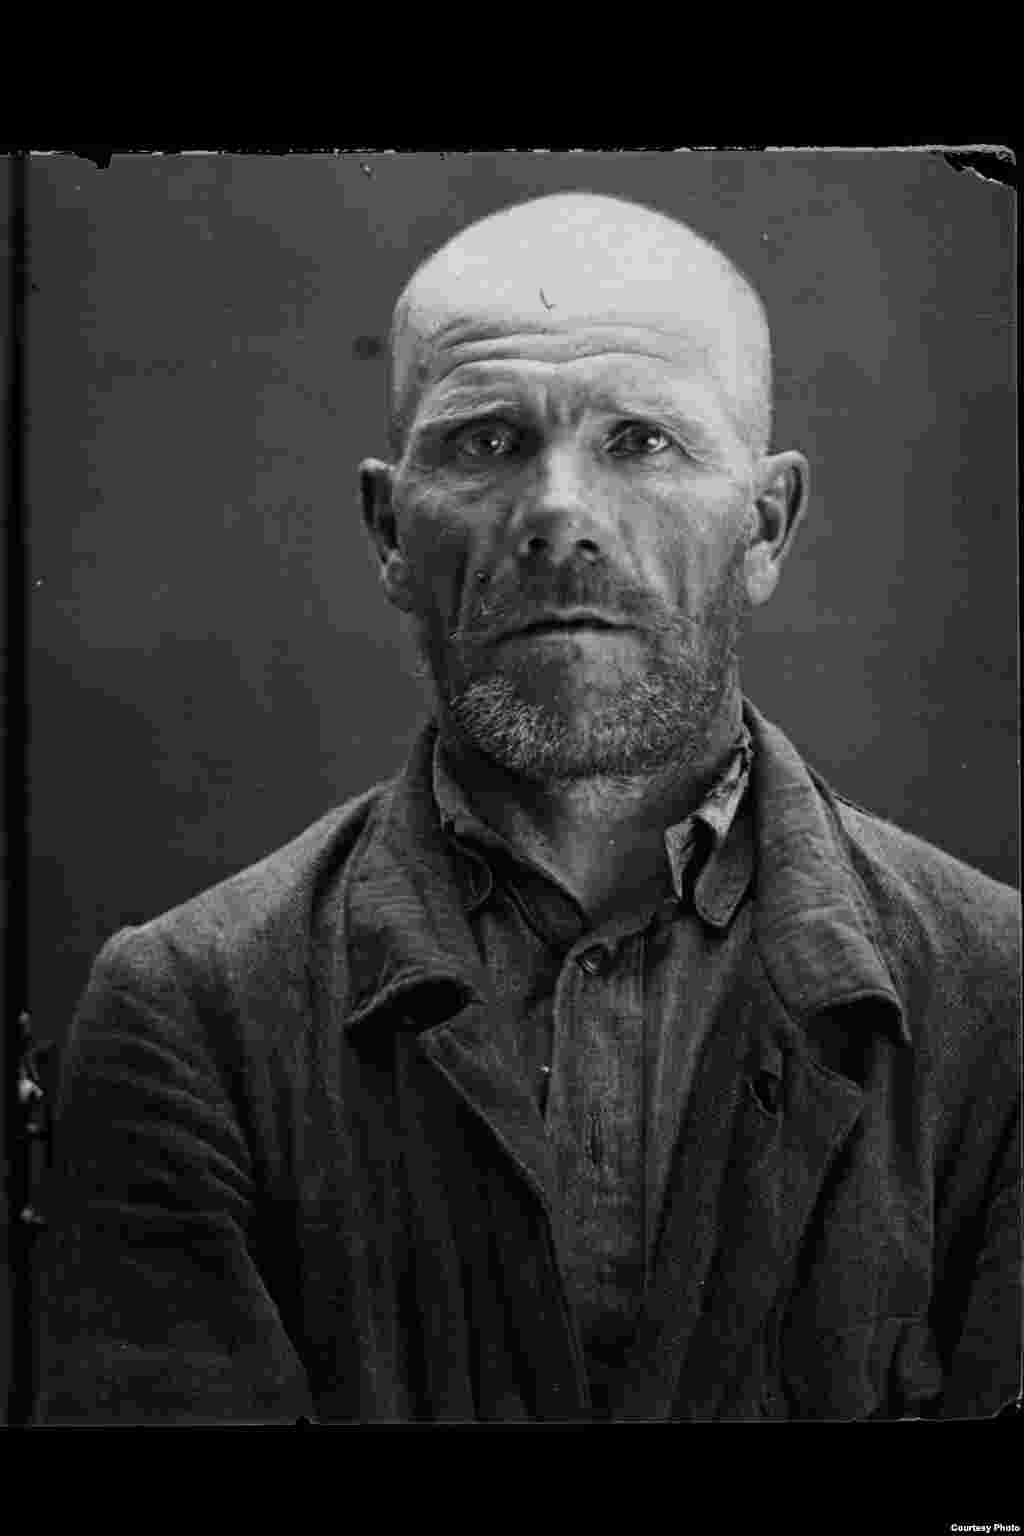 Gavrill Sergeyevich Bogdanov: Russian; born 1888 in Aminevo village, Moscow Oblast; primary education; no party affiliation; laborer; lived in Aminevo. Arrested on August 8, 1937. Sentenced to death on August 19, 1937. Executed on August 20, 1937. Rehabilitated in 1989.